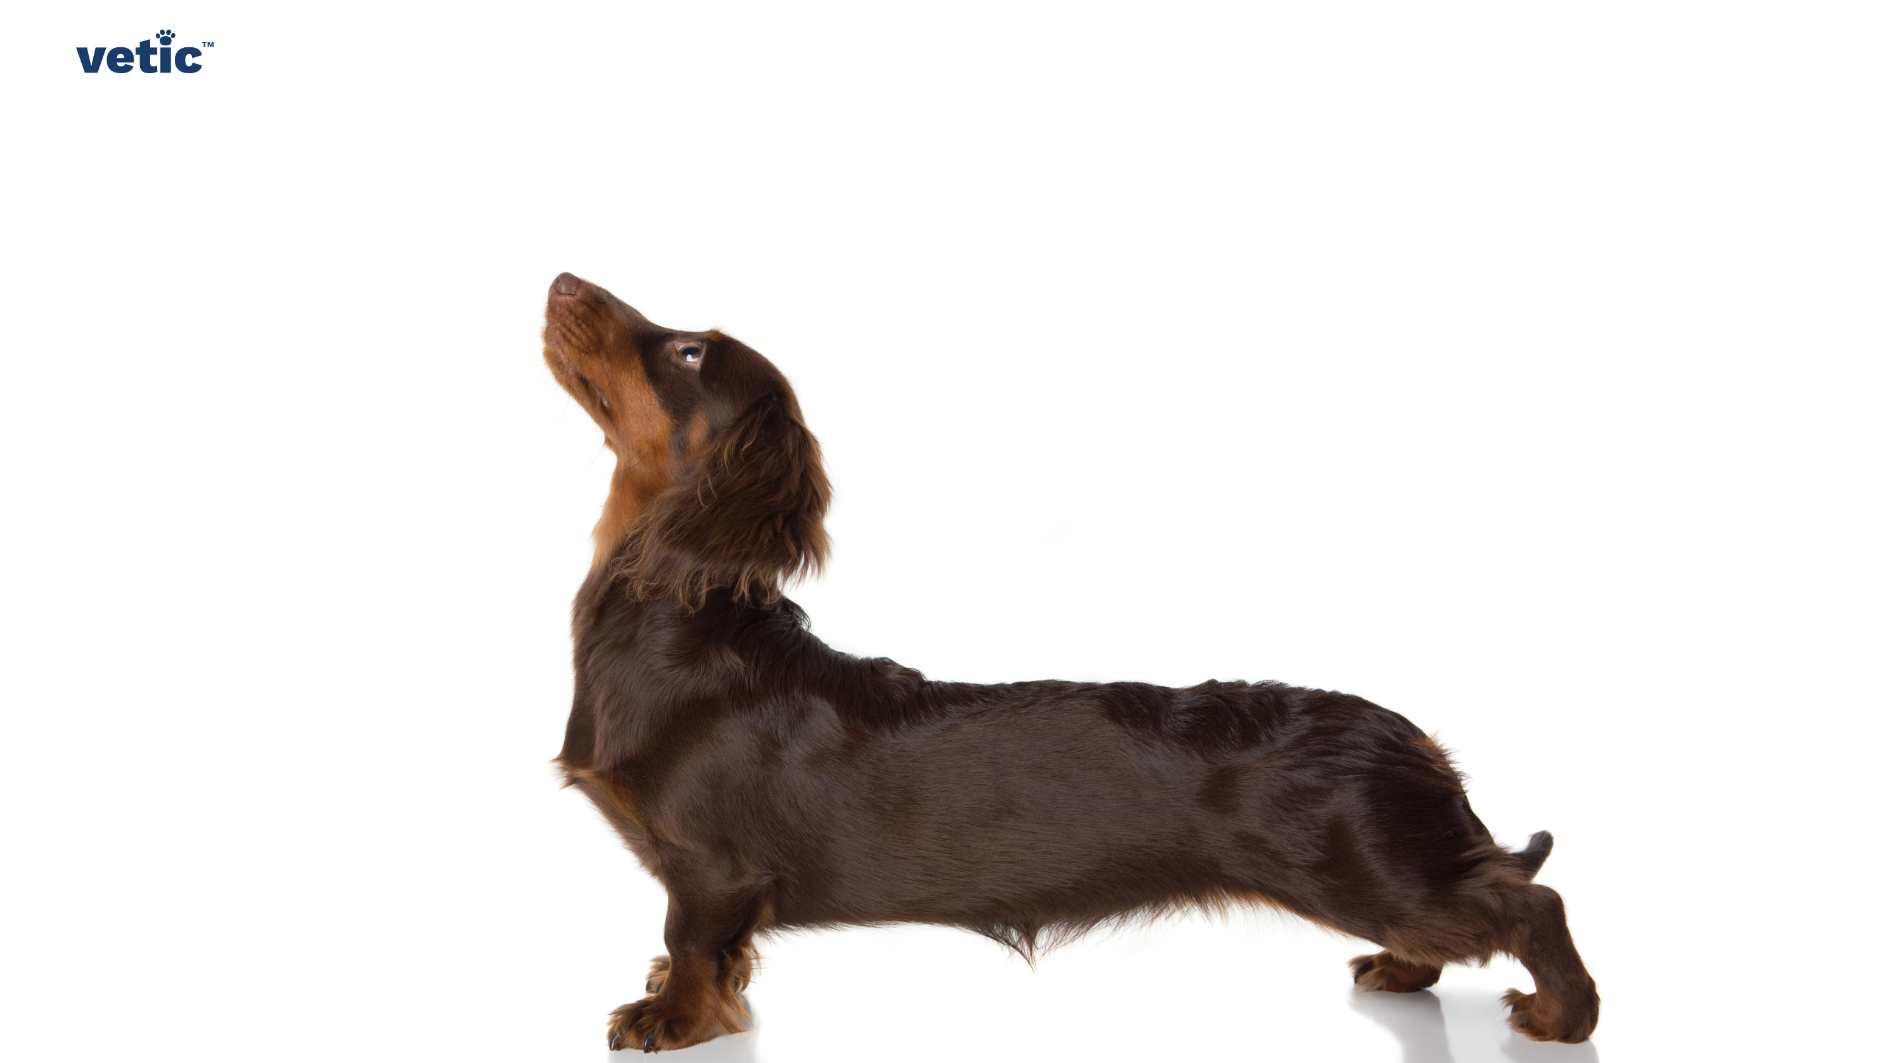 A long-haired dachshund in profile view, looking upwards, with the logo “vetic” in the top left corner. It is a part of a series of photos featuring Dachshunds belonging to the blog "Adopting a Dachshund" The image features a long-haired dachshund in profile view. The dachshund has a luxurious, flowing coat. It gazes upwards, capturing a moment of curiosity or attention. The background is plain white. In the top left corner, there’s a watermark with the text “vetic.”